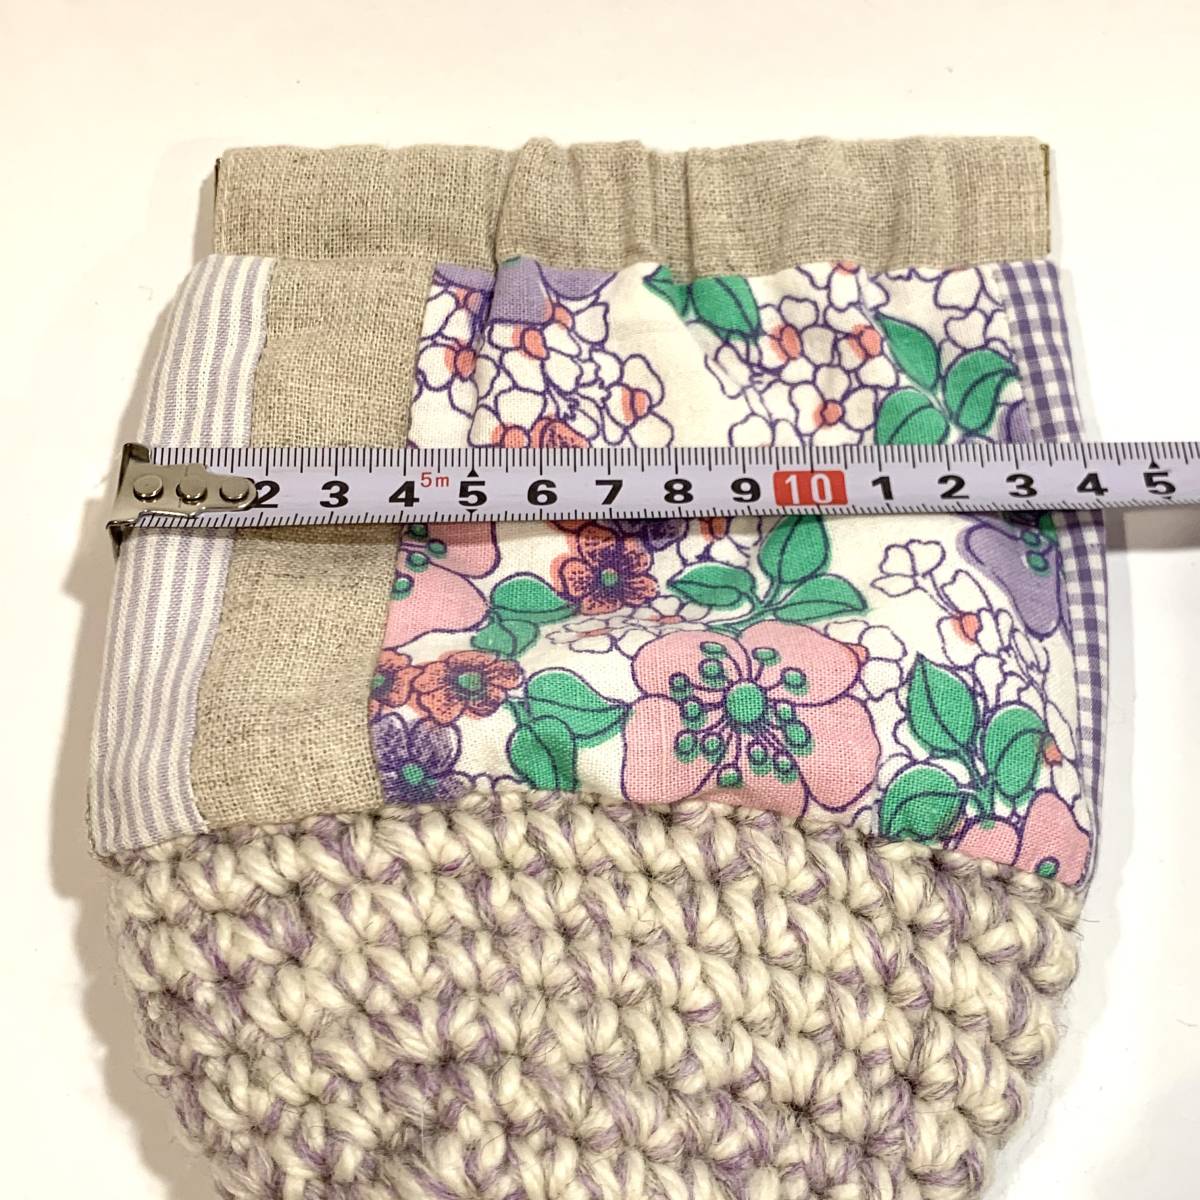  hand made unused goods Vintage fabric use knitted circle bottom spring pouch purple series floral print feed sak